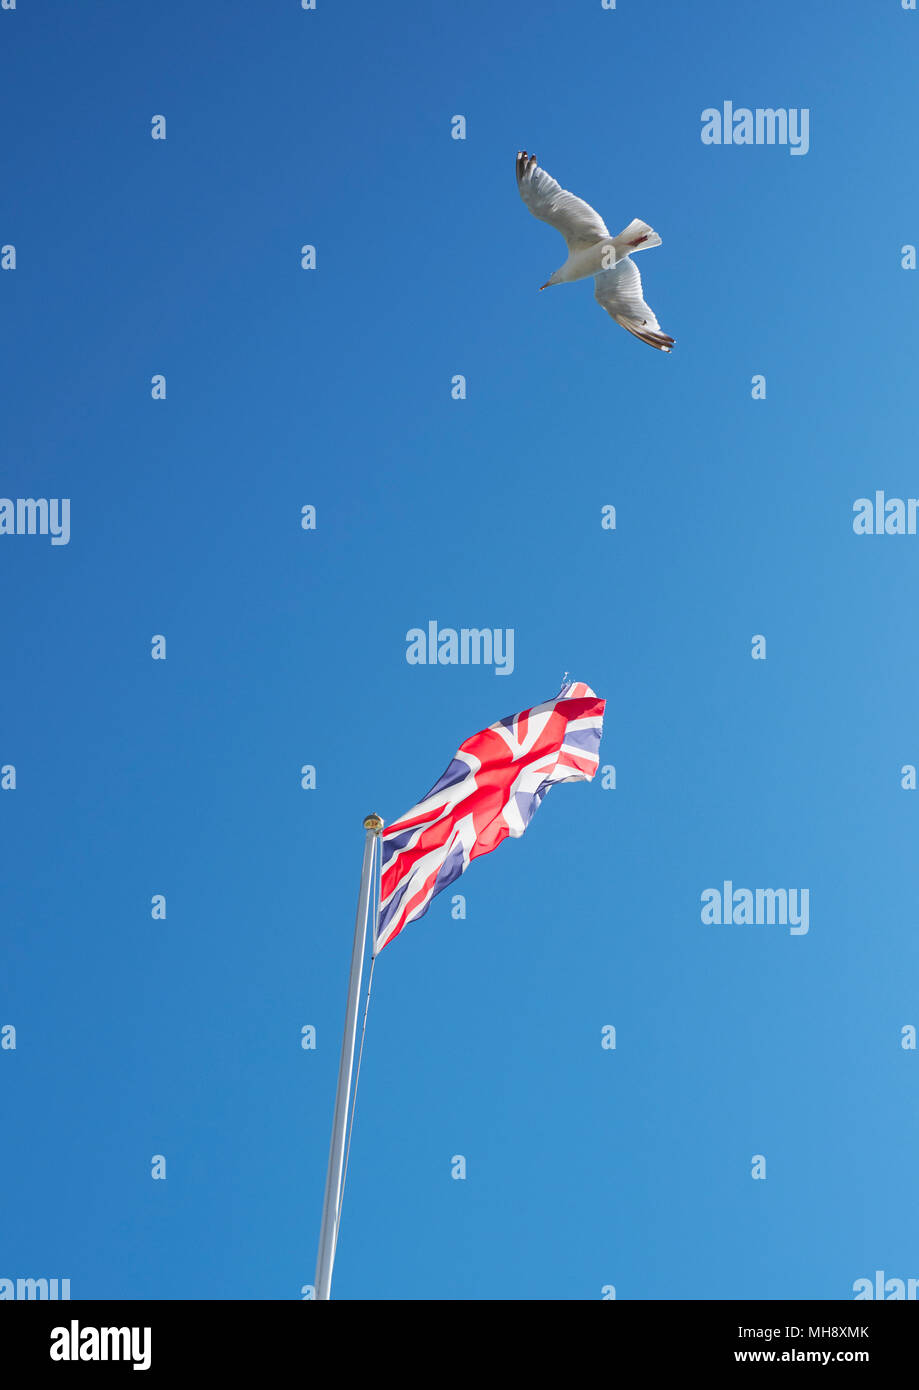 UK flying free - A Union Jack flag flying in a blue sky with a seagull Stock Photo